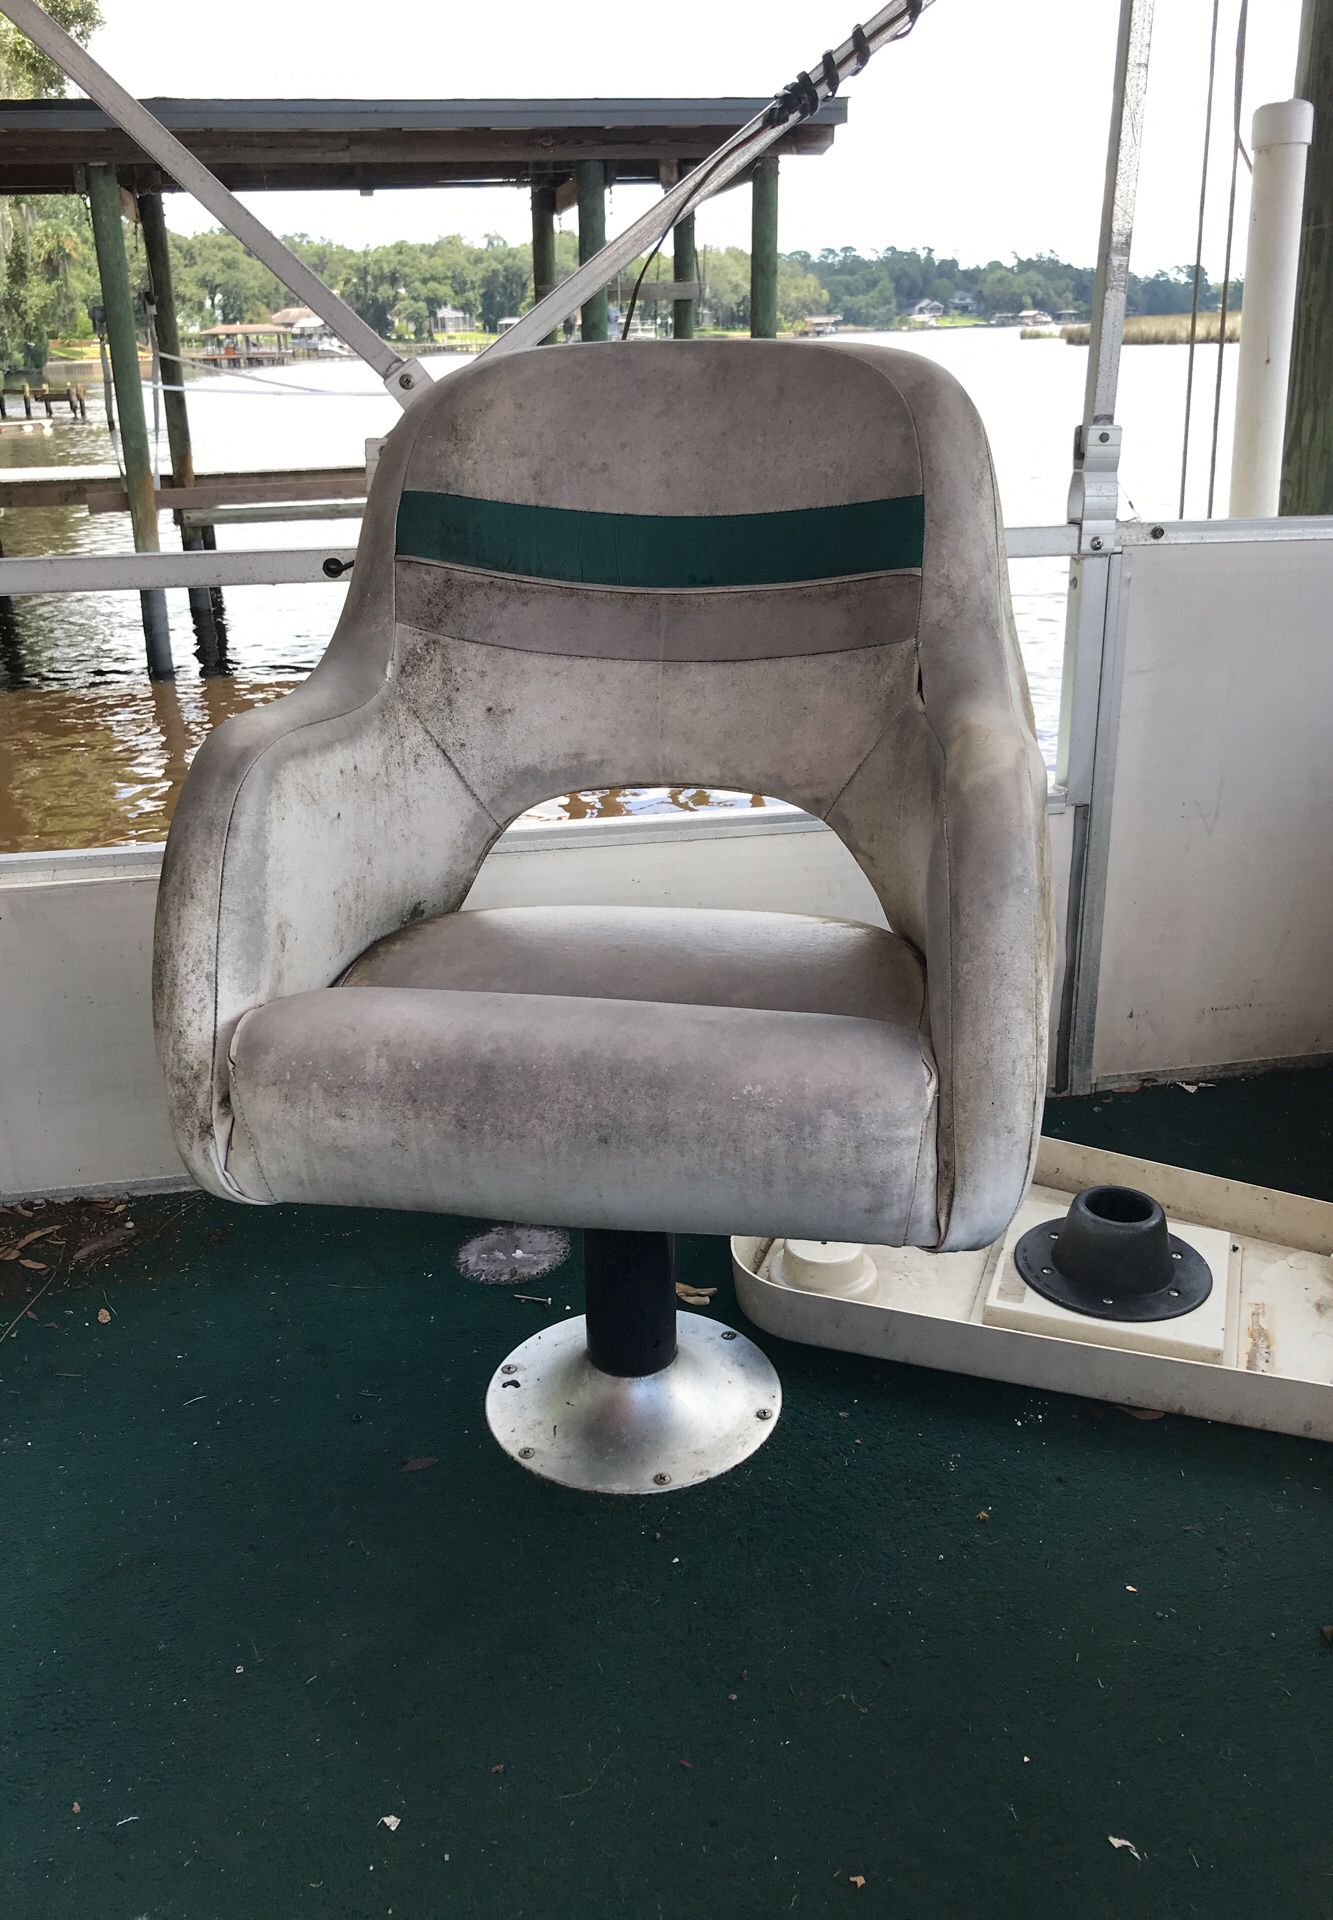 Captains chair pontoon boat